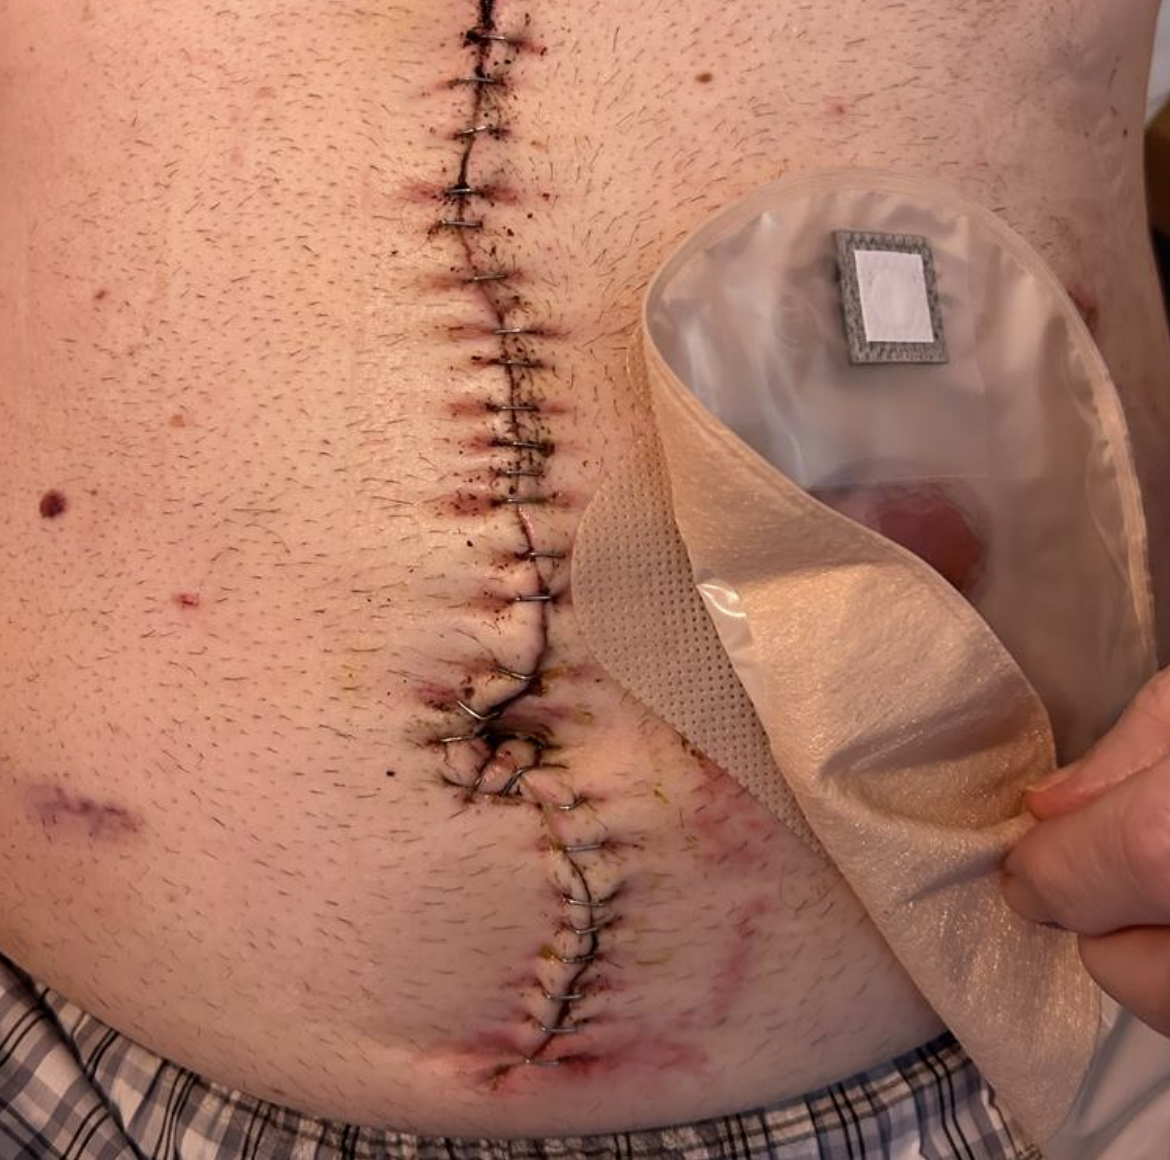 Roger had 32 staples inserted